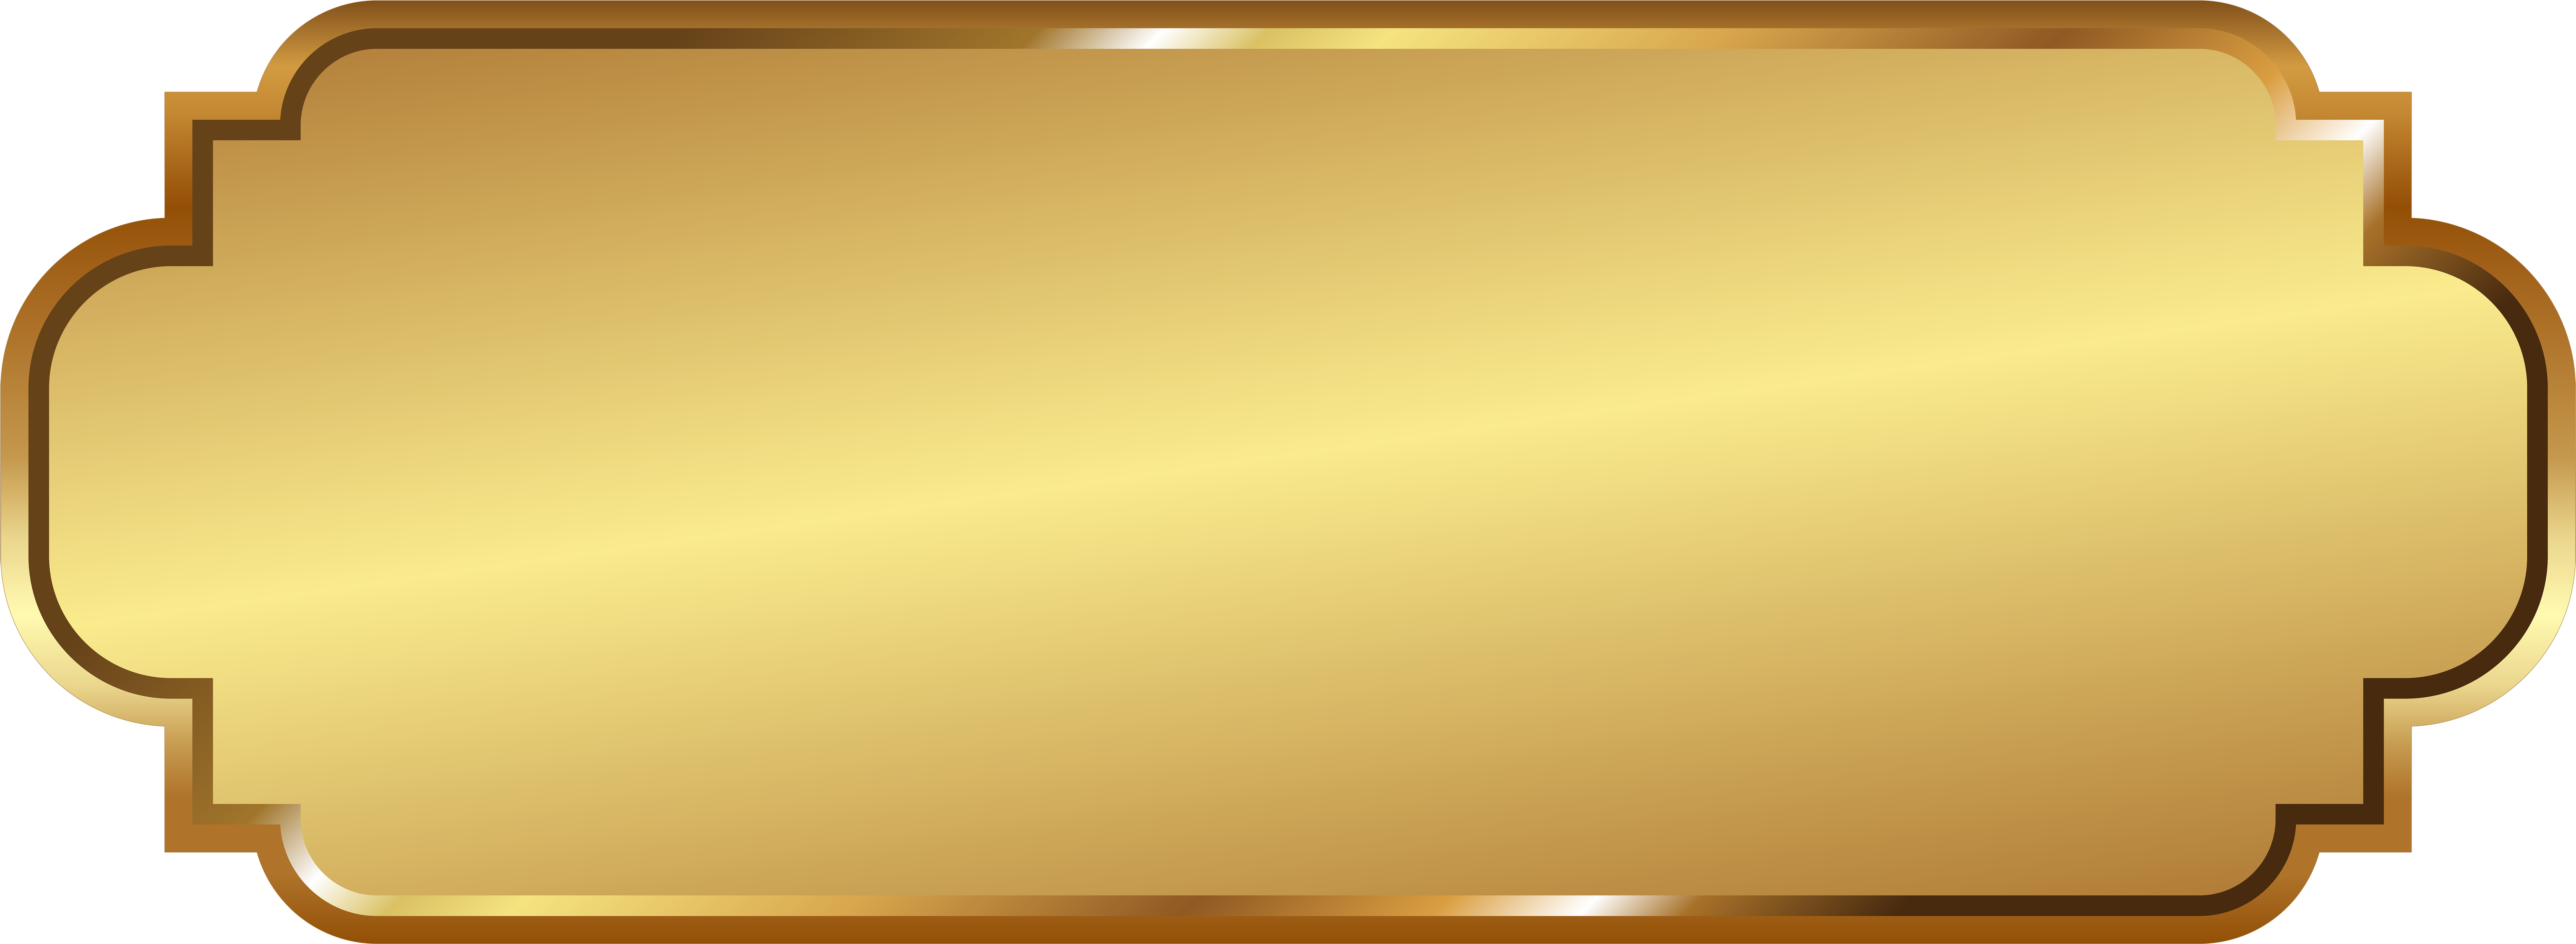 A Gold Rectangular Object With A Gold Border